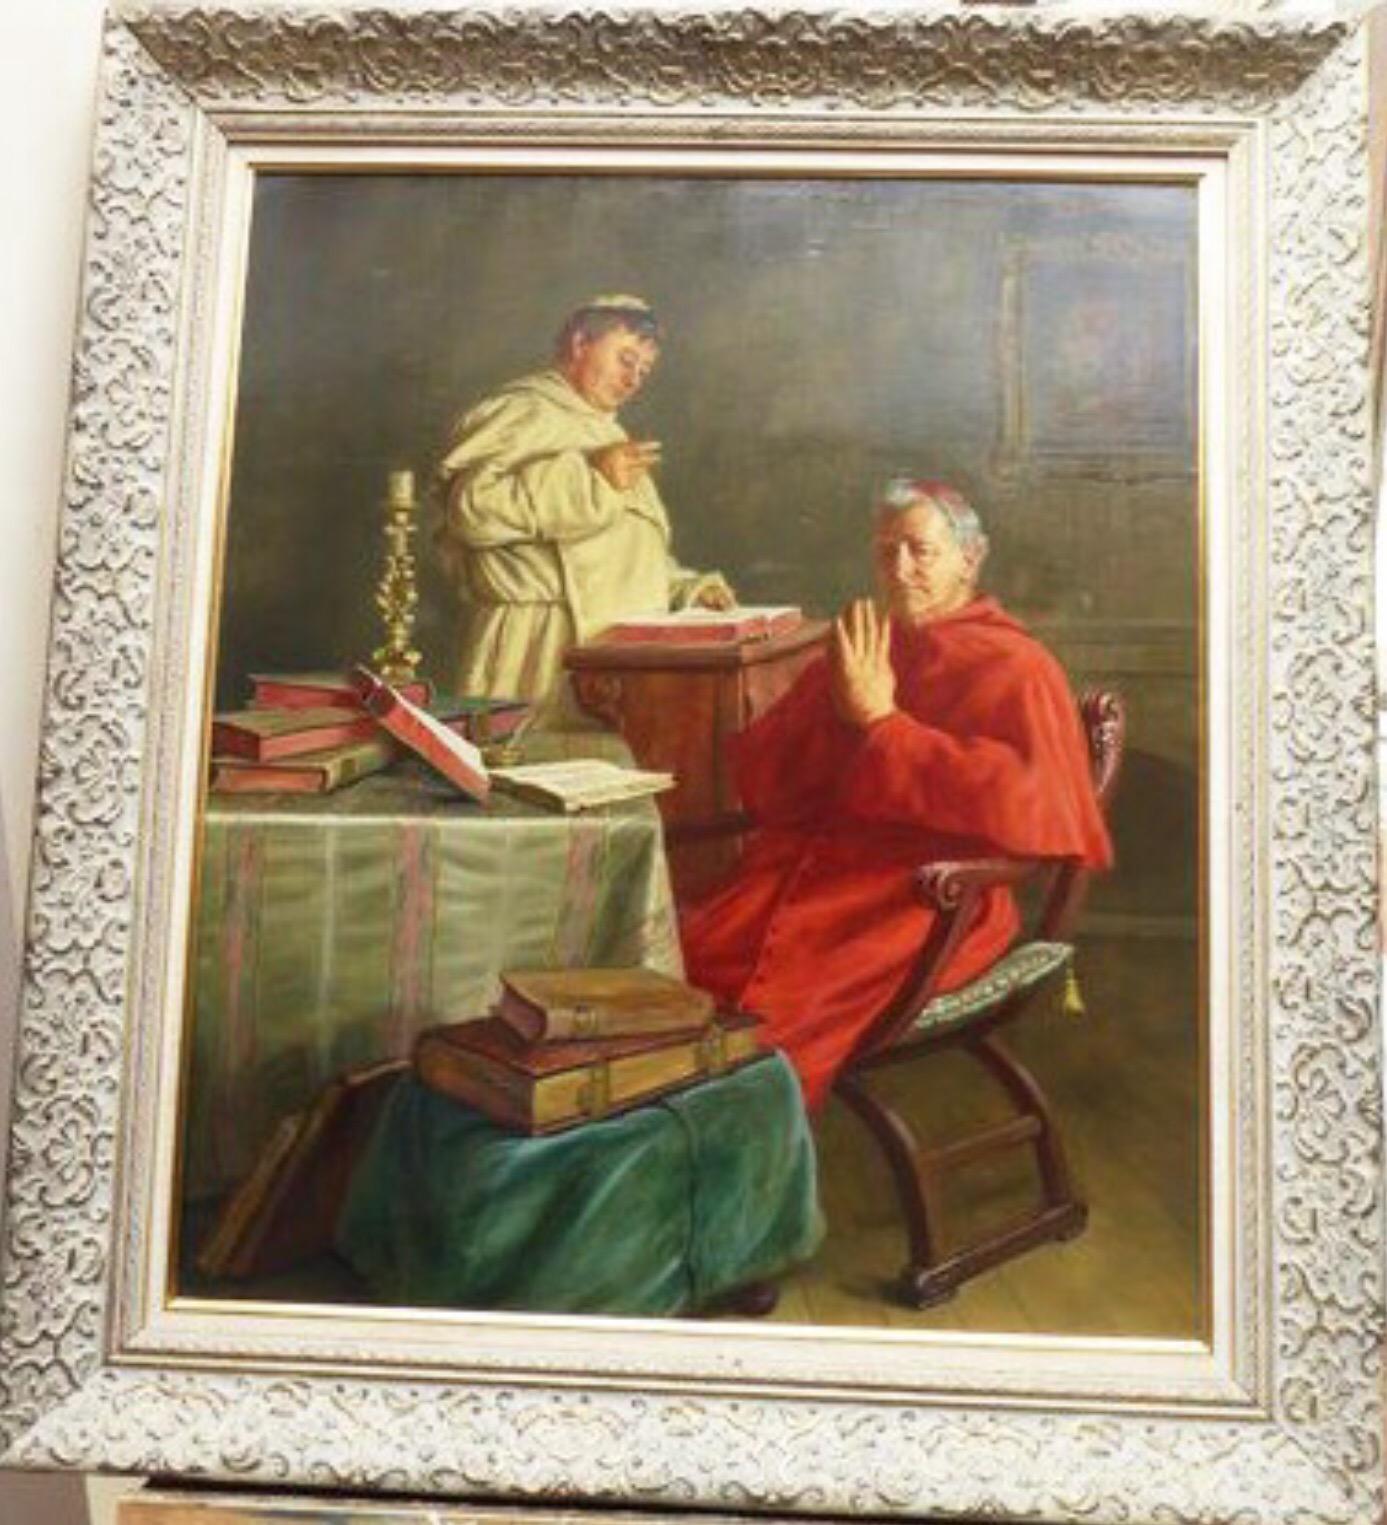 Fine Oil Portrait Painting on Canvas Of A Vatican Cardinal Sitting & Praying Wearing His Distinct Red Robes Within A Room Setting.

Presented In The Large Original Plaster Moulded Decorative Frame.

Inscription Verso On Wooden Stretcher

Bright